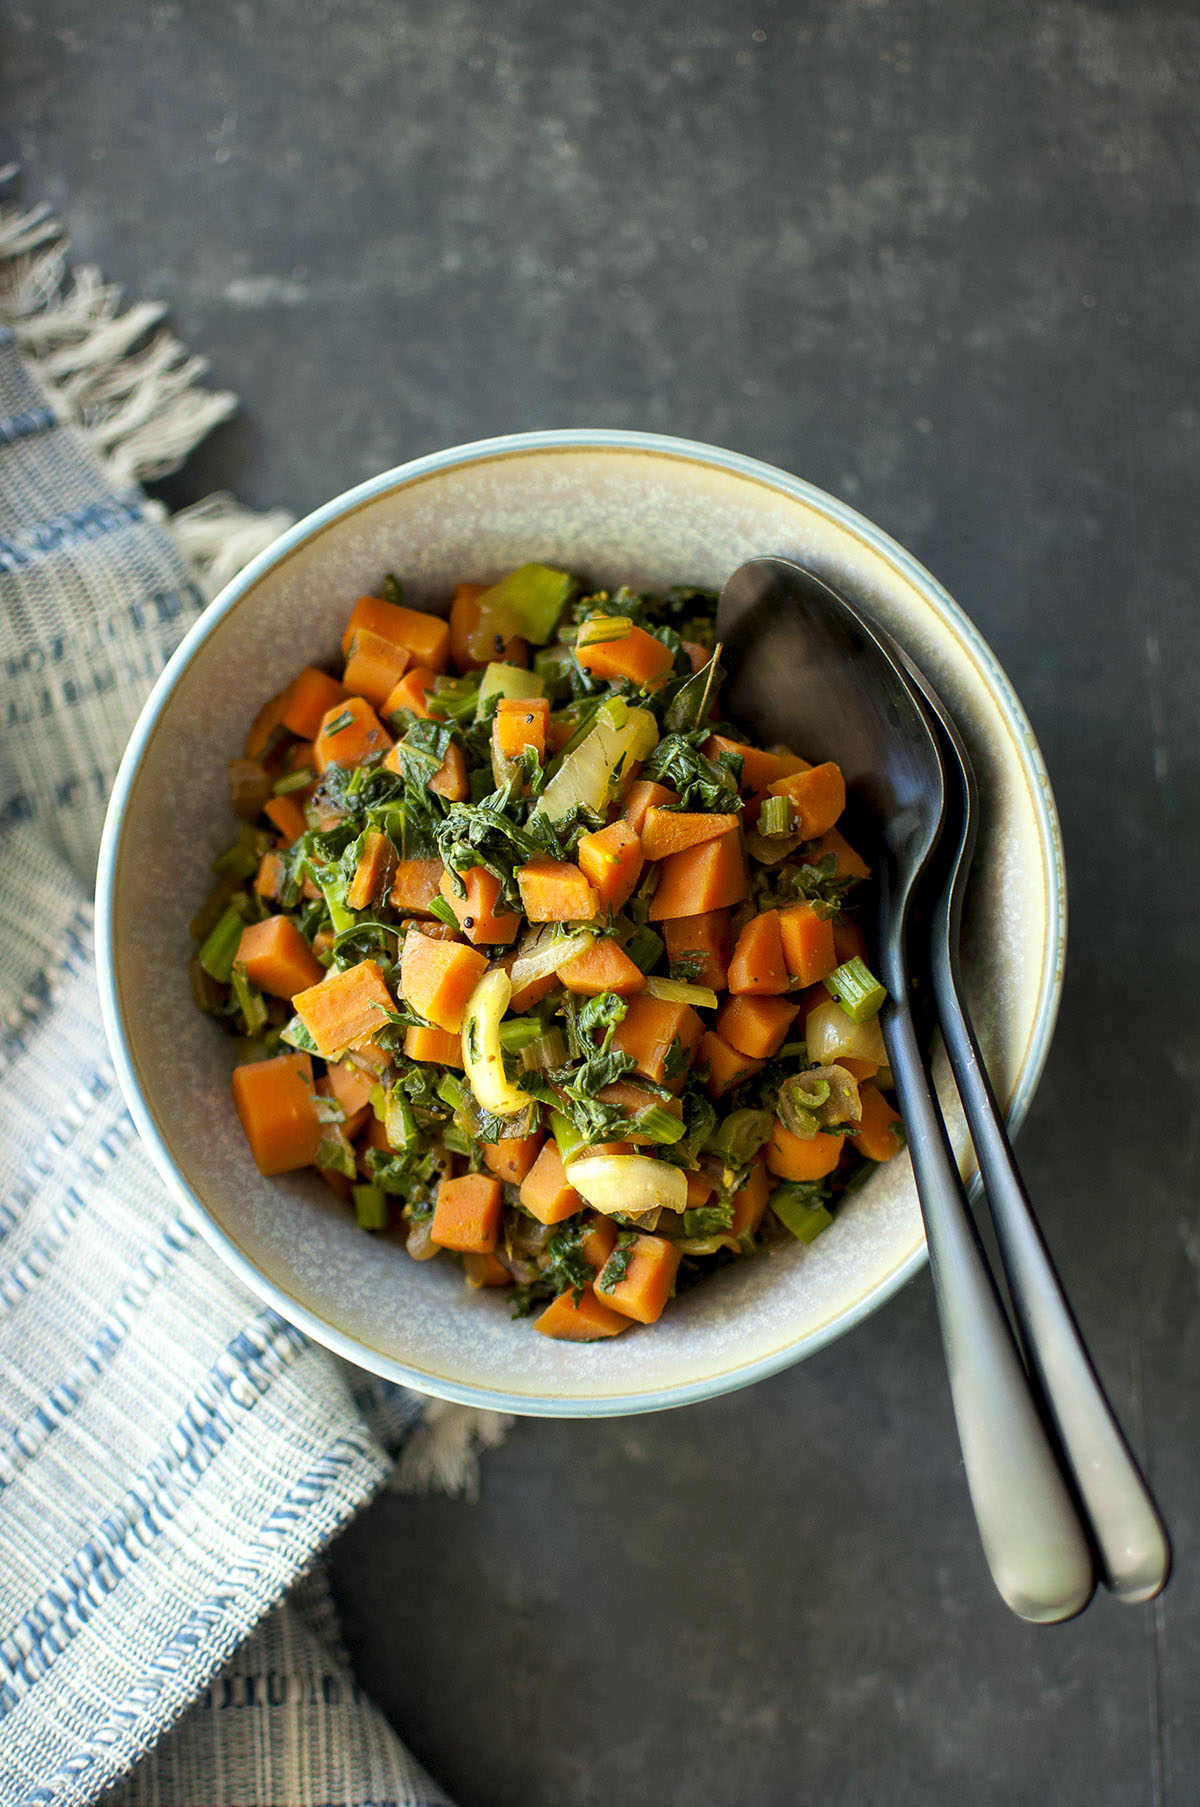 Top view of a bowl with greens and carrot stir fry.